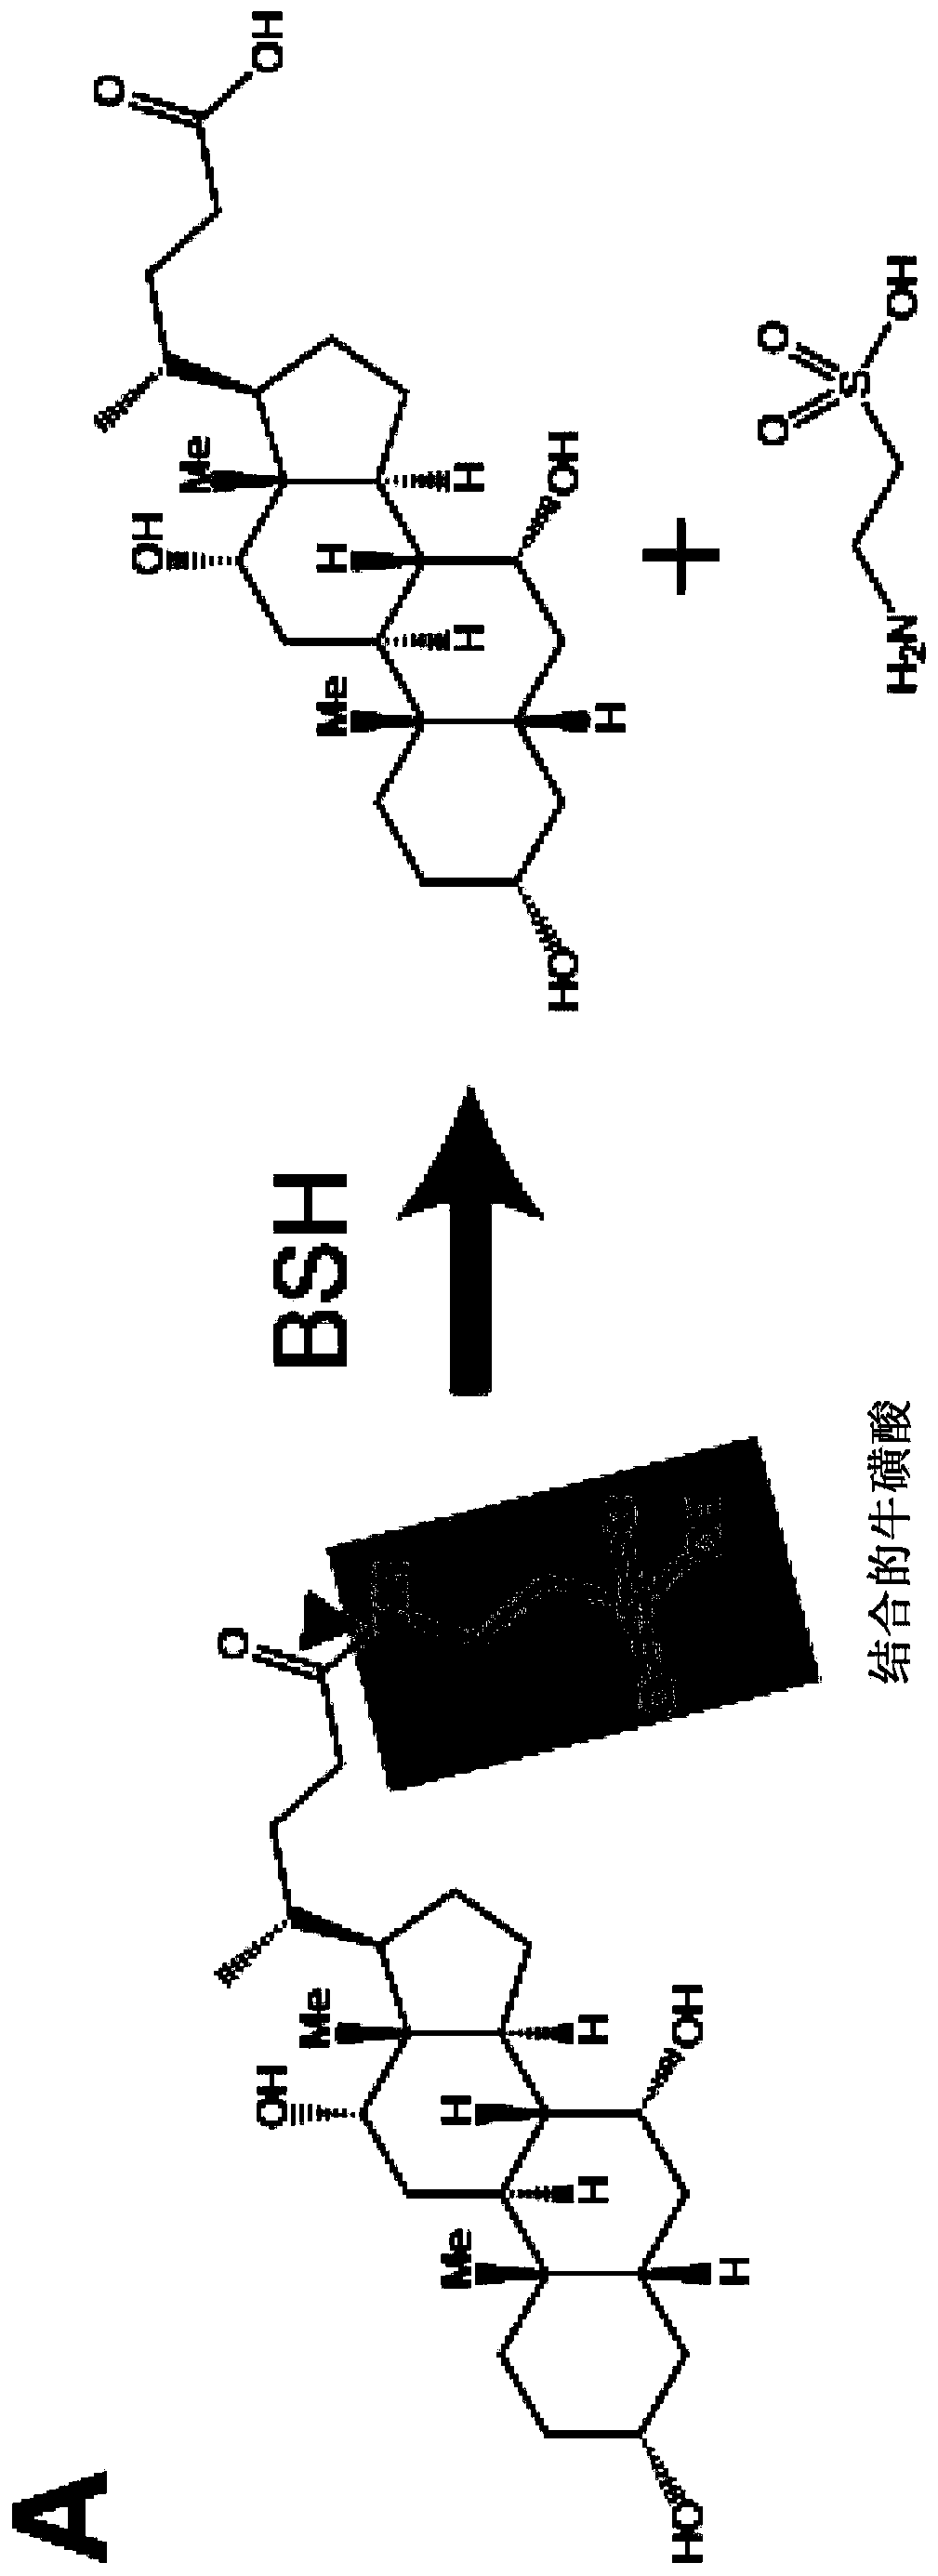 Engineered commensal bacteria and methods of use